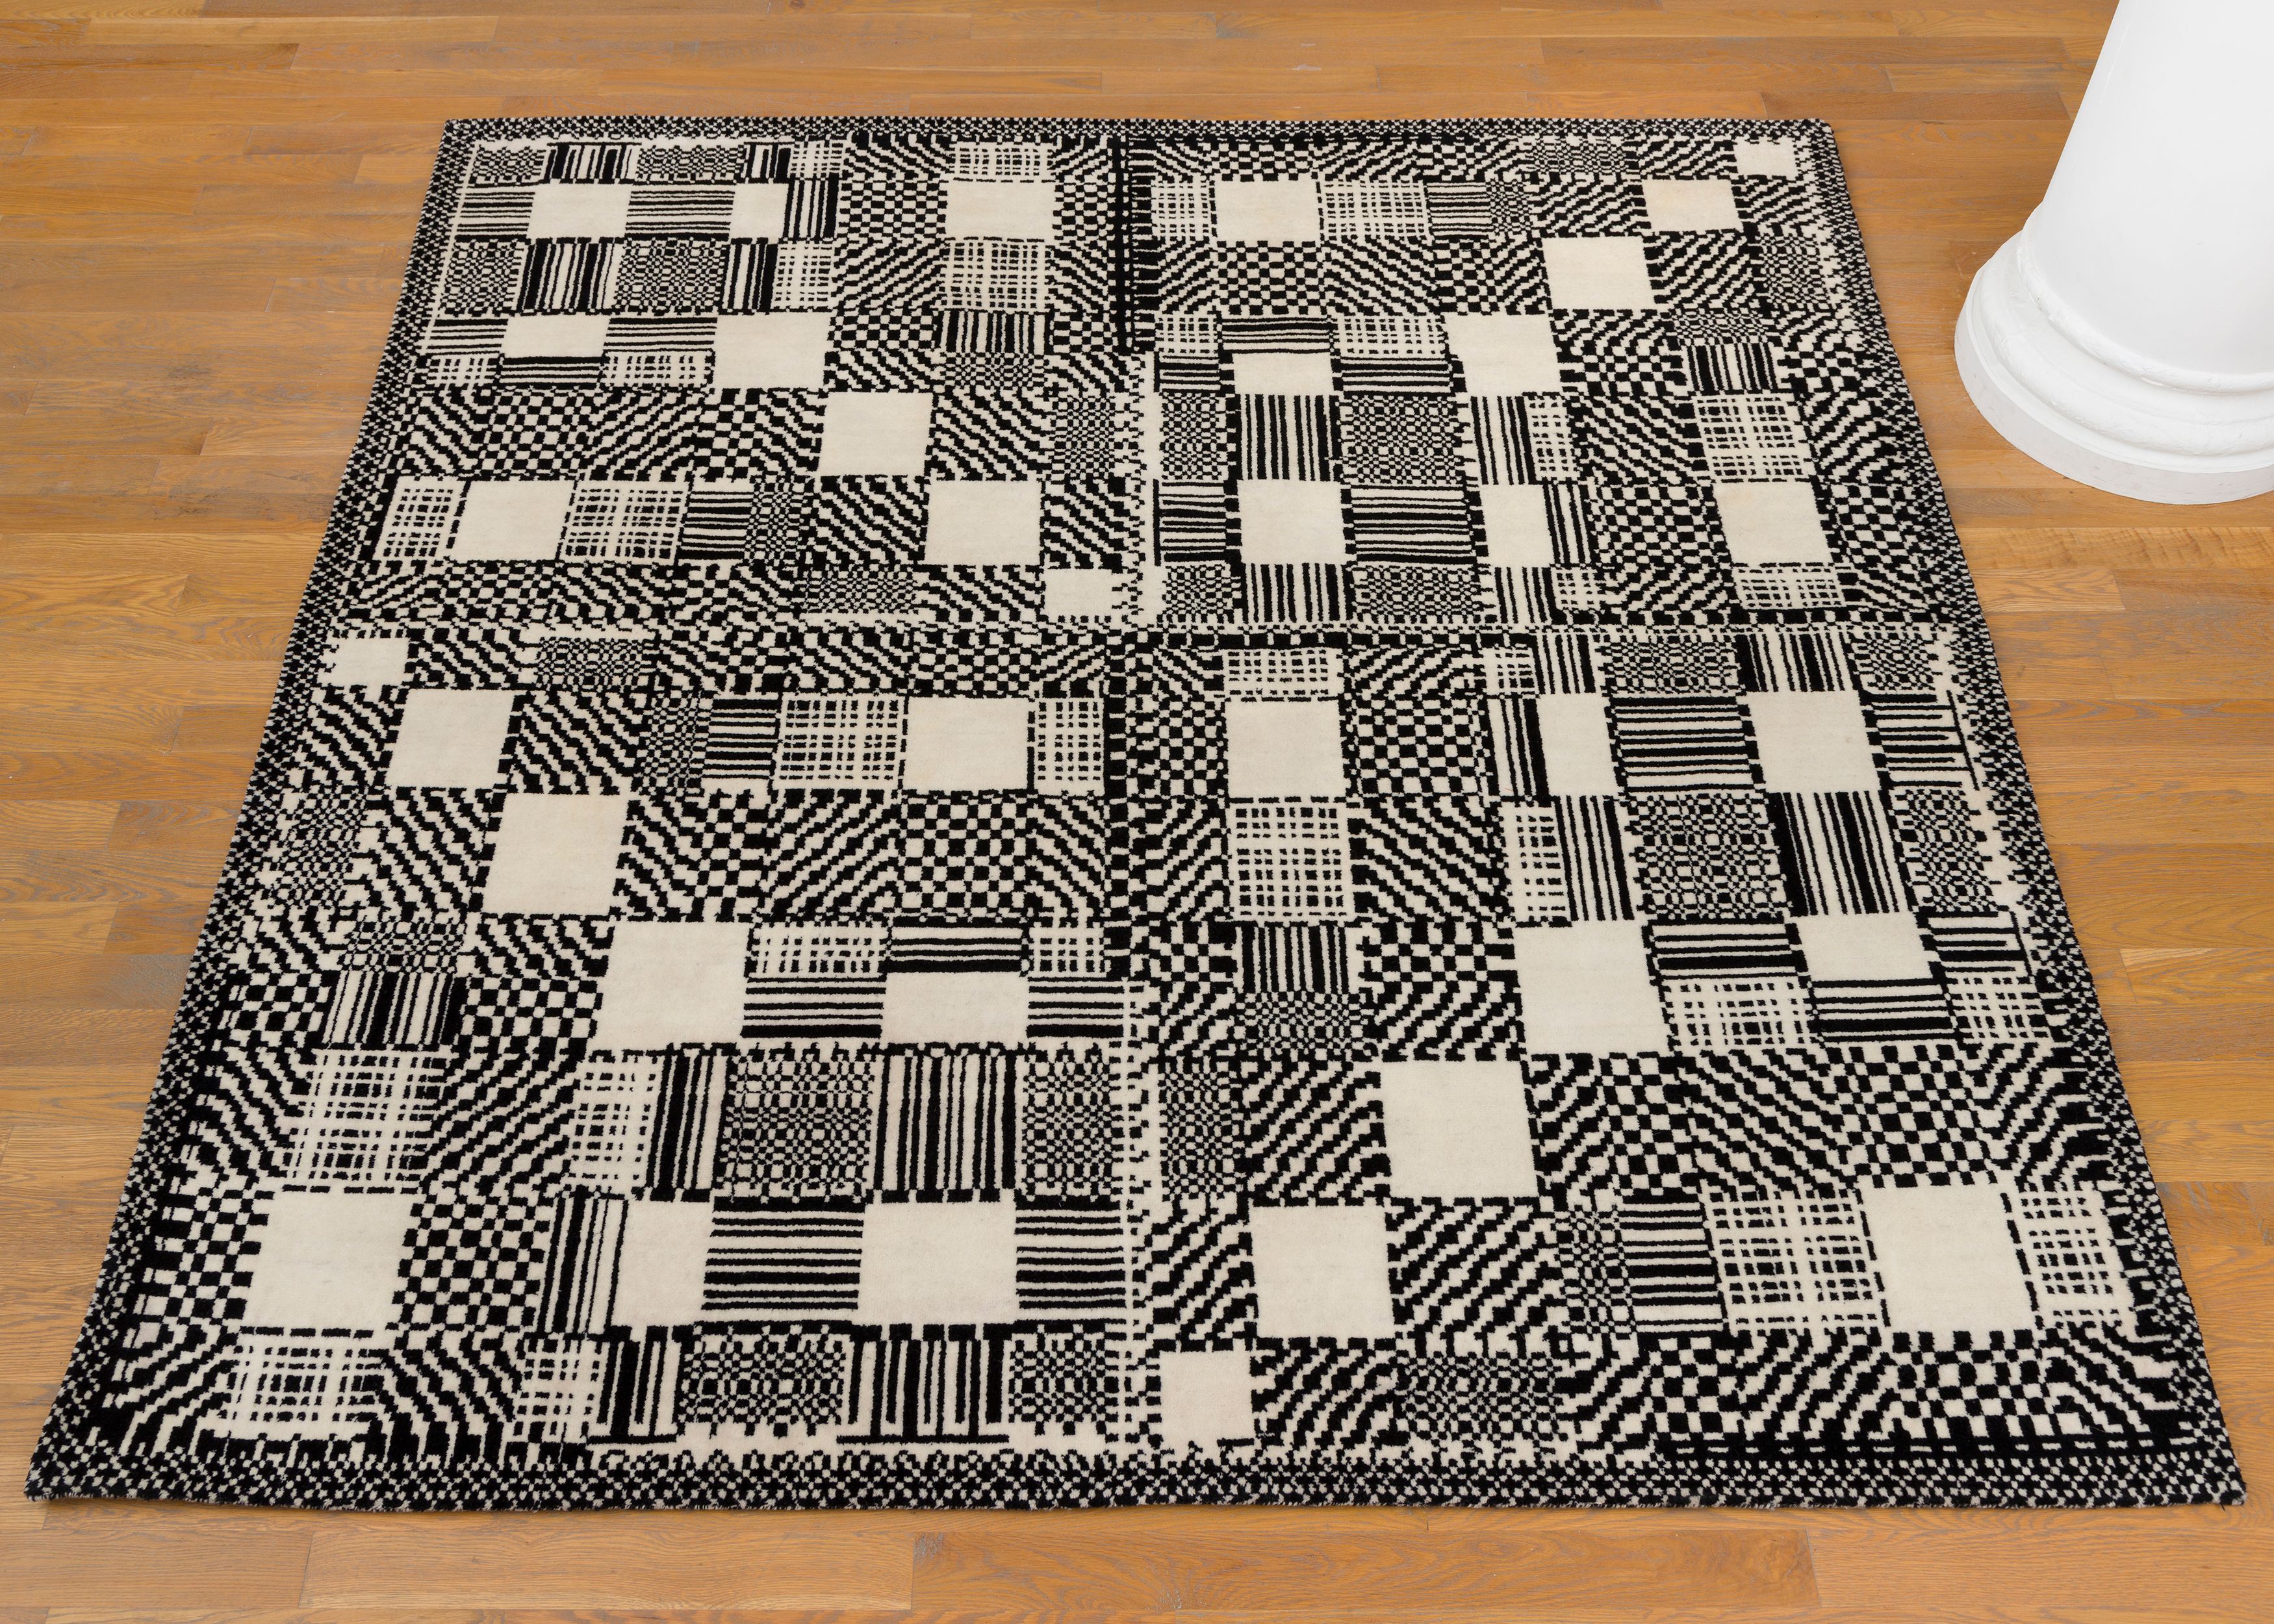 Travess Smalley, Pixel Rug (07_11_21_Pixel_Rug_01), 2022, hand-knotted wool, JavaScript, Photoshop, 96 x 96 in. (243.84 x 243.84 cm). Woven by Ramraj Kailash Thakur